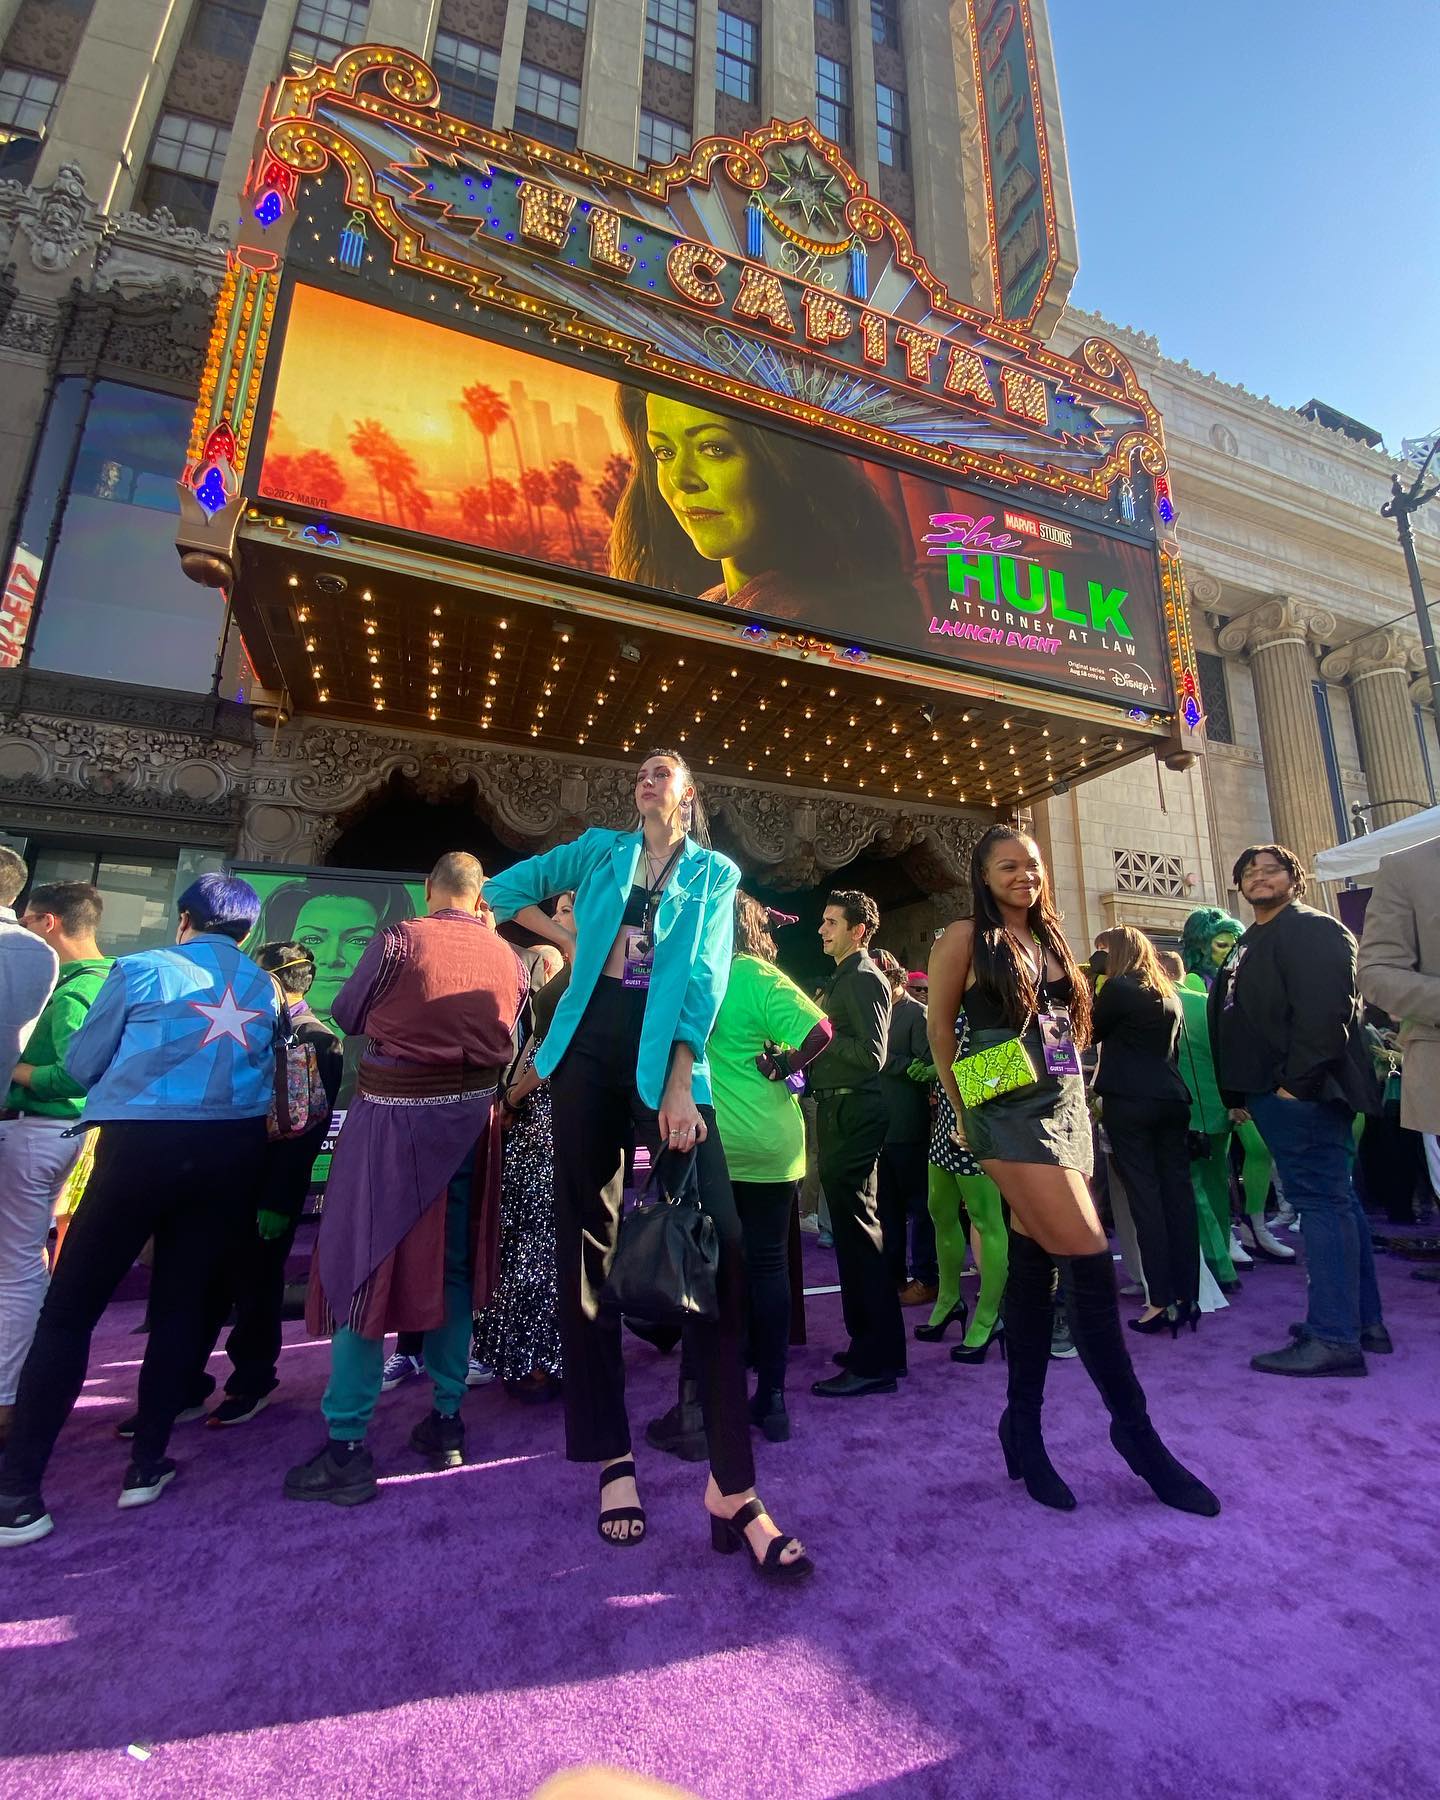 @shehulkofficial 💚💜 so excited to see She-Hulk coming out!! Grateful to have had the opportunity to work as the on set “She-Hulk” VFX Reference/ stunt performer (for some scenes)😊 and to be able to work with an amazing group of talented people 😊💚💜🤙🏼
💖😇Special shout out to my incredible talent agency / agent Lisa at @ohsosmall 💖😇